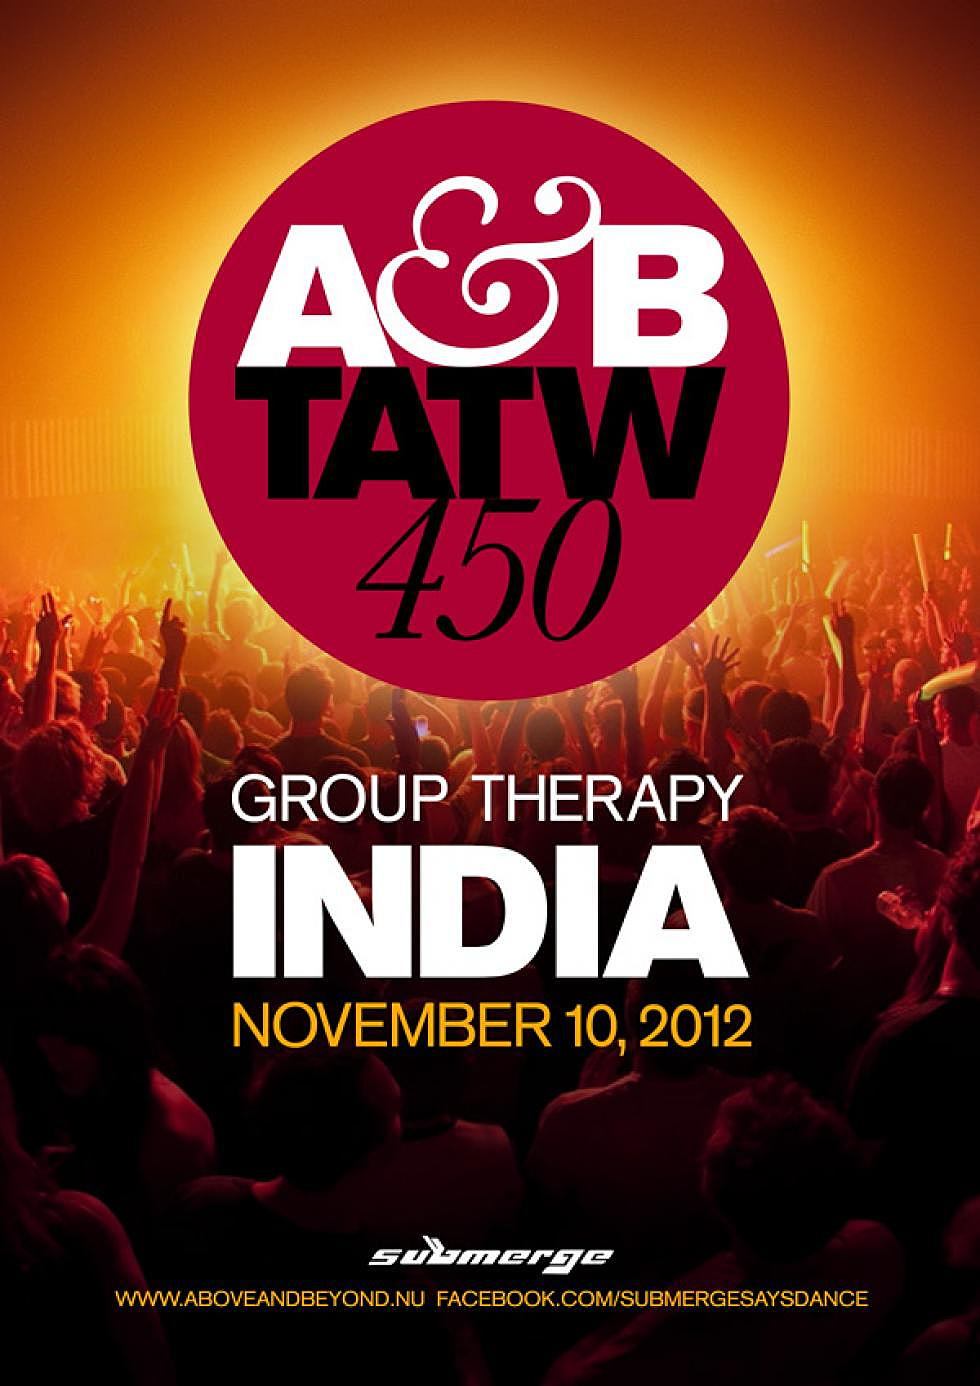 Above &#038; Beyond Celebrate Milestone 450th Radio Show w/ Group Therapy India